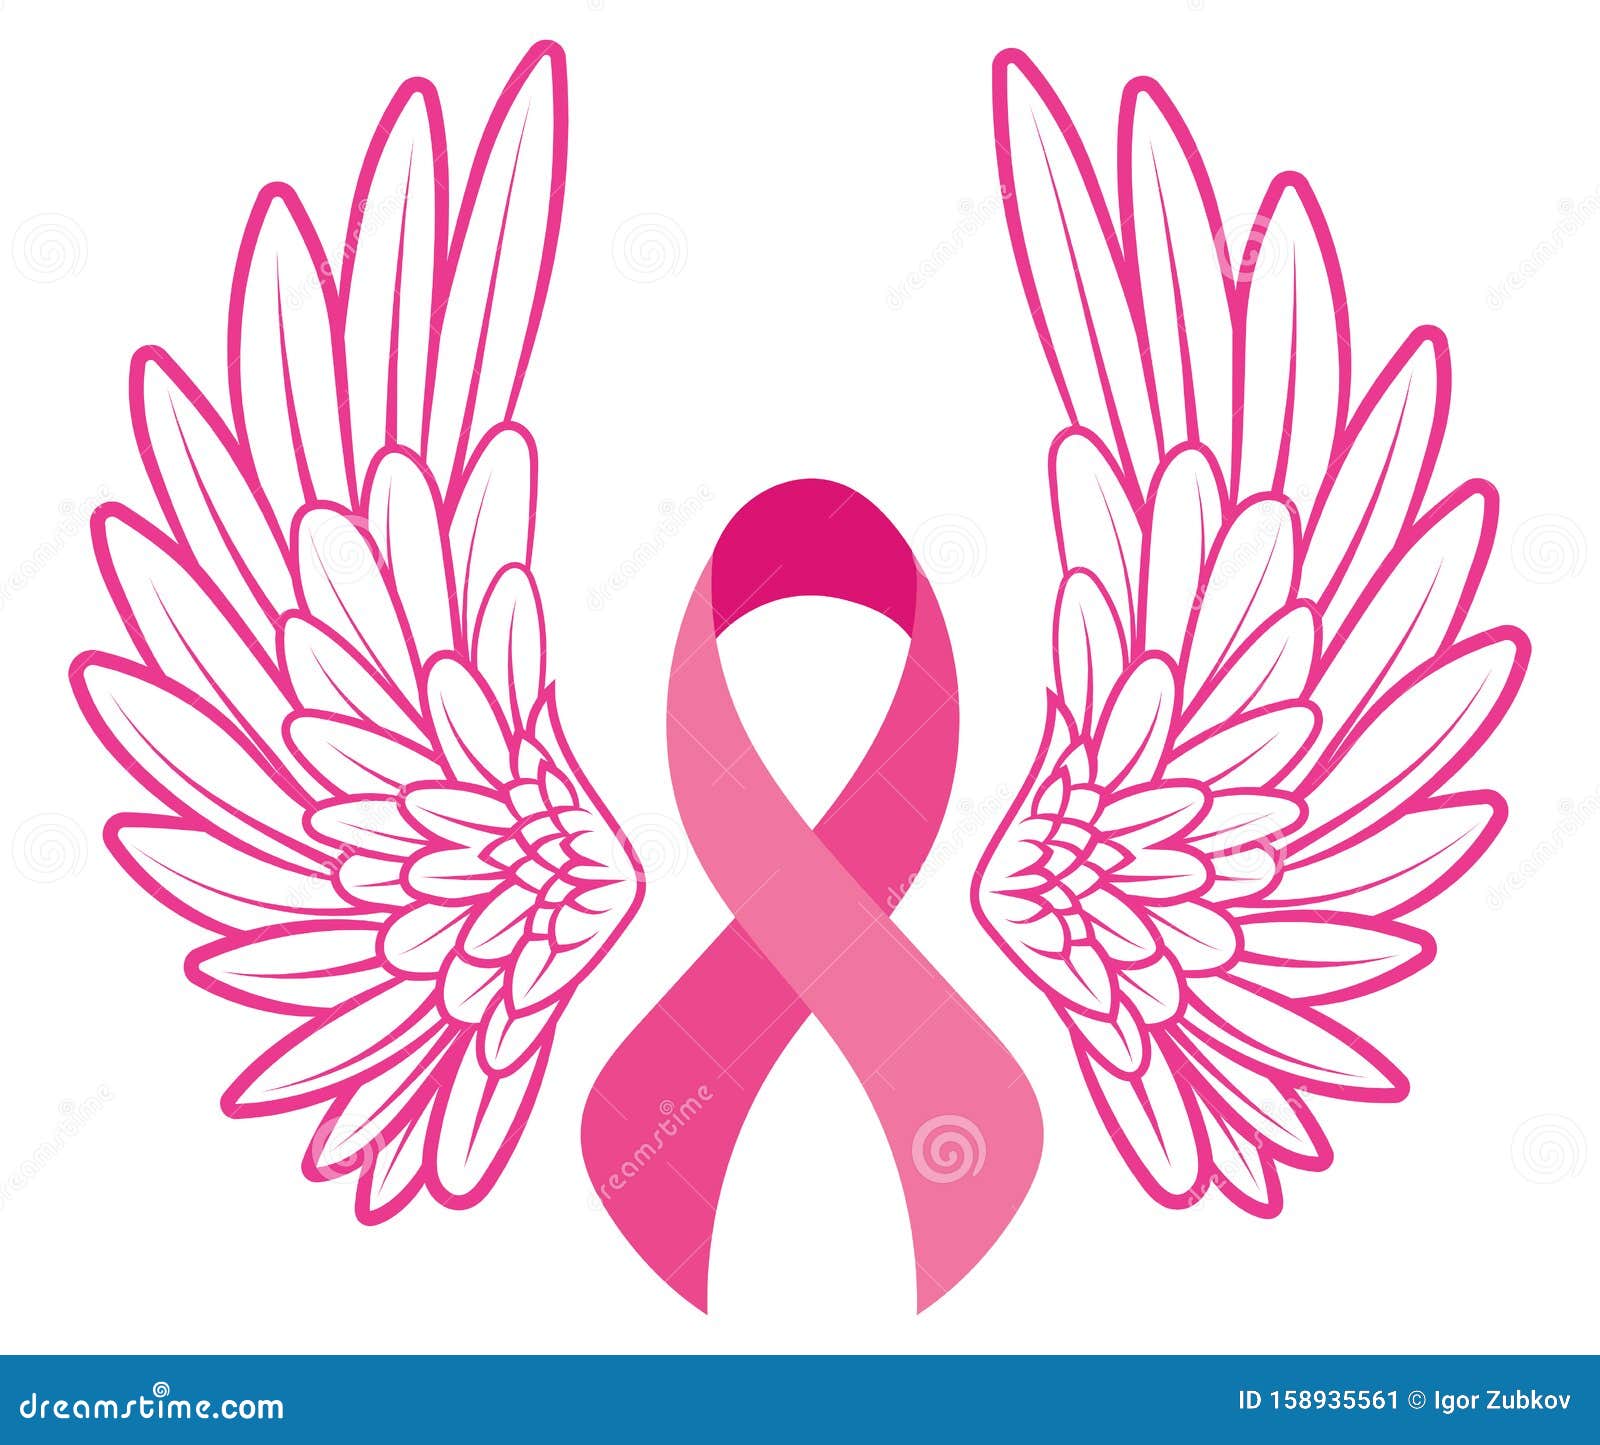 Winged green ribbon liver cancer awareness' Women's T-Shirt